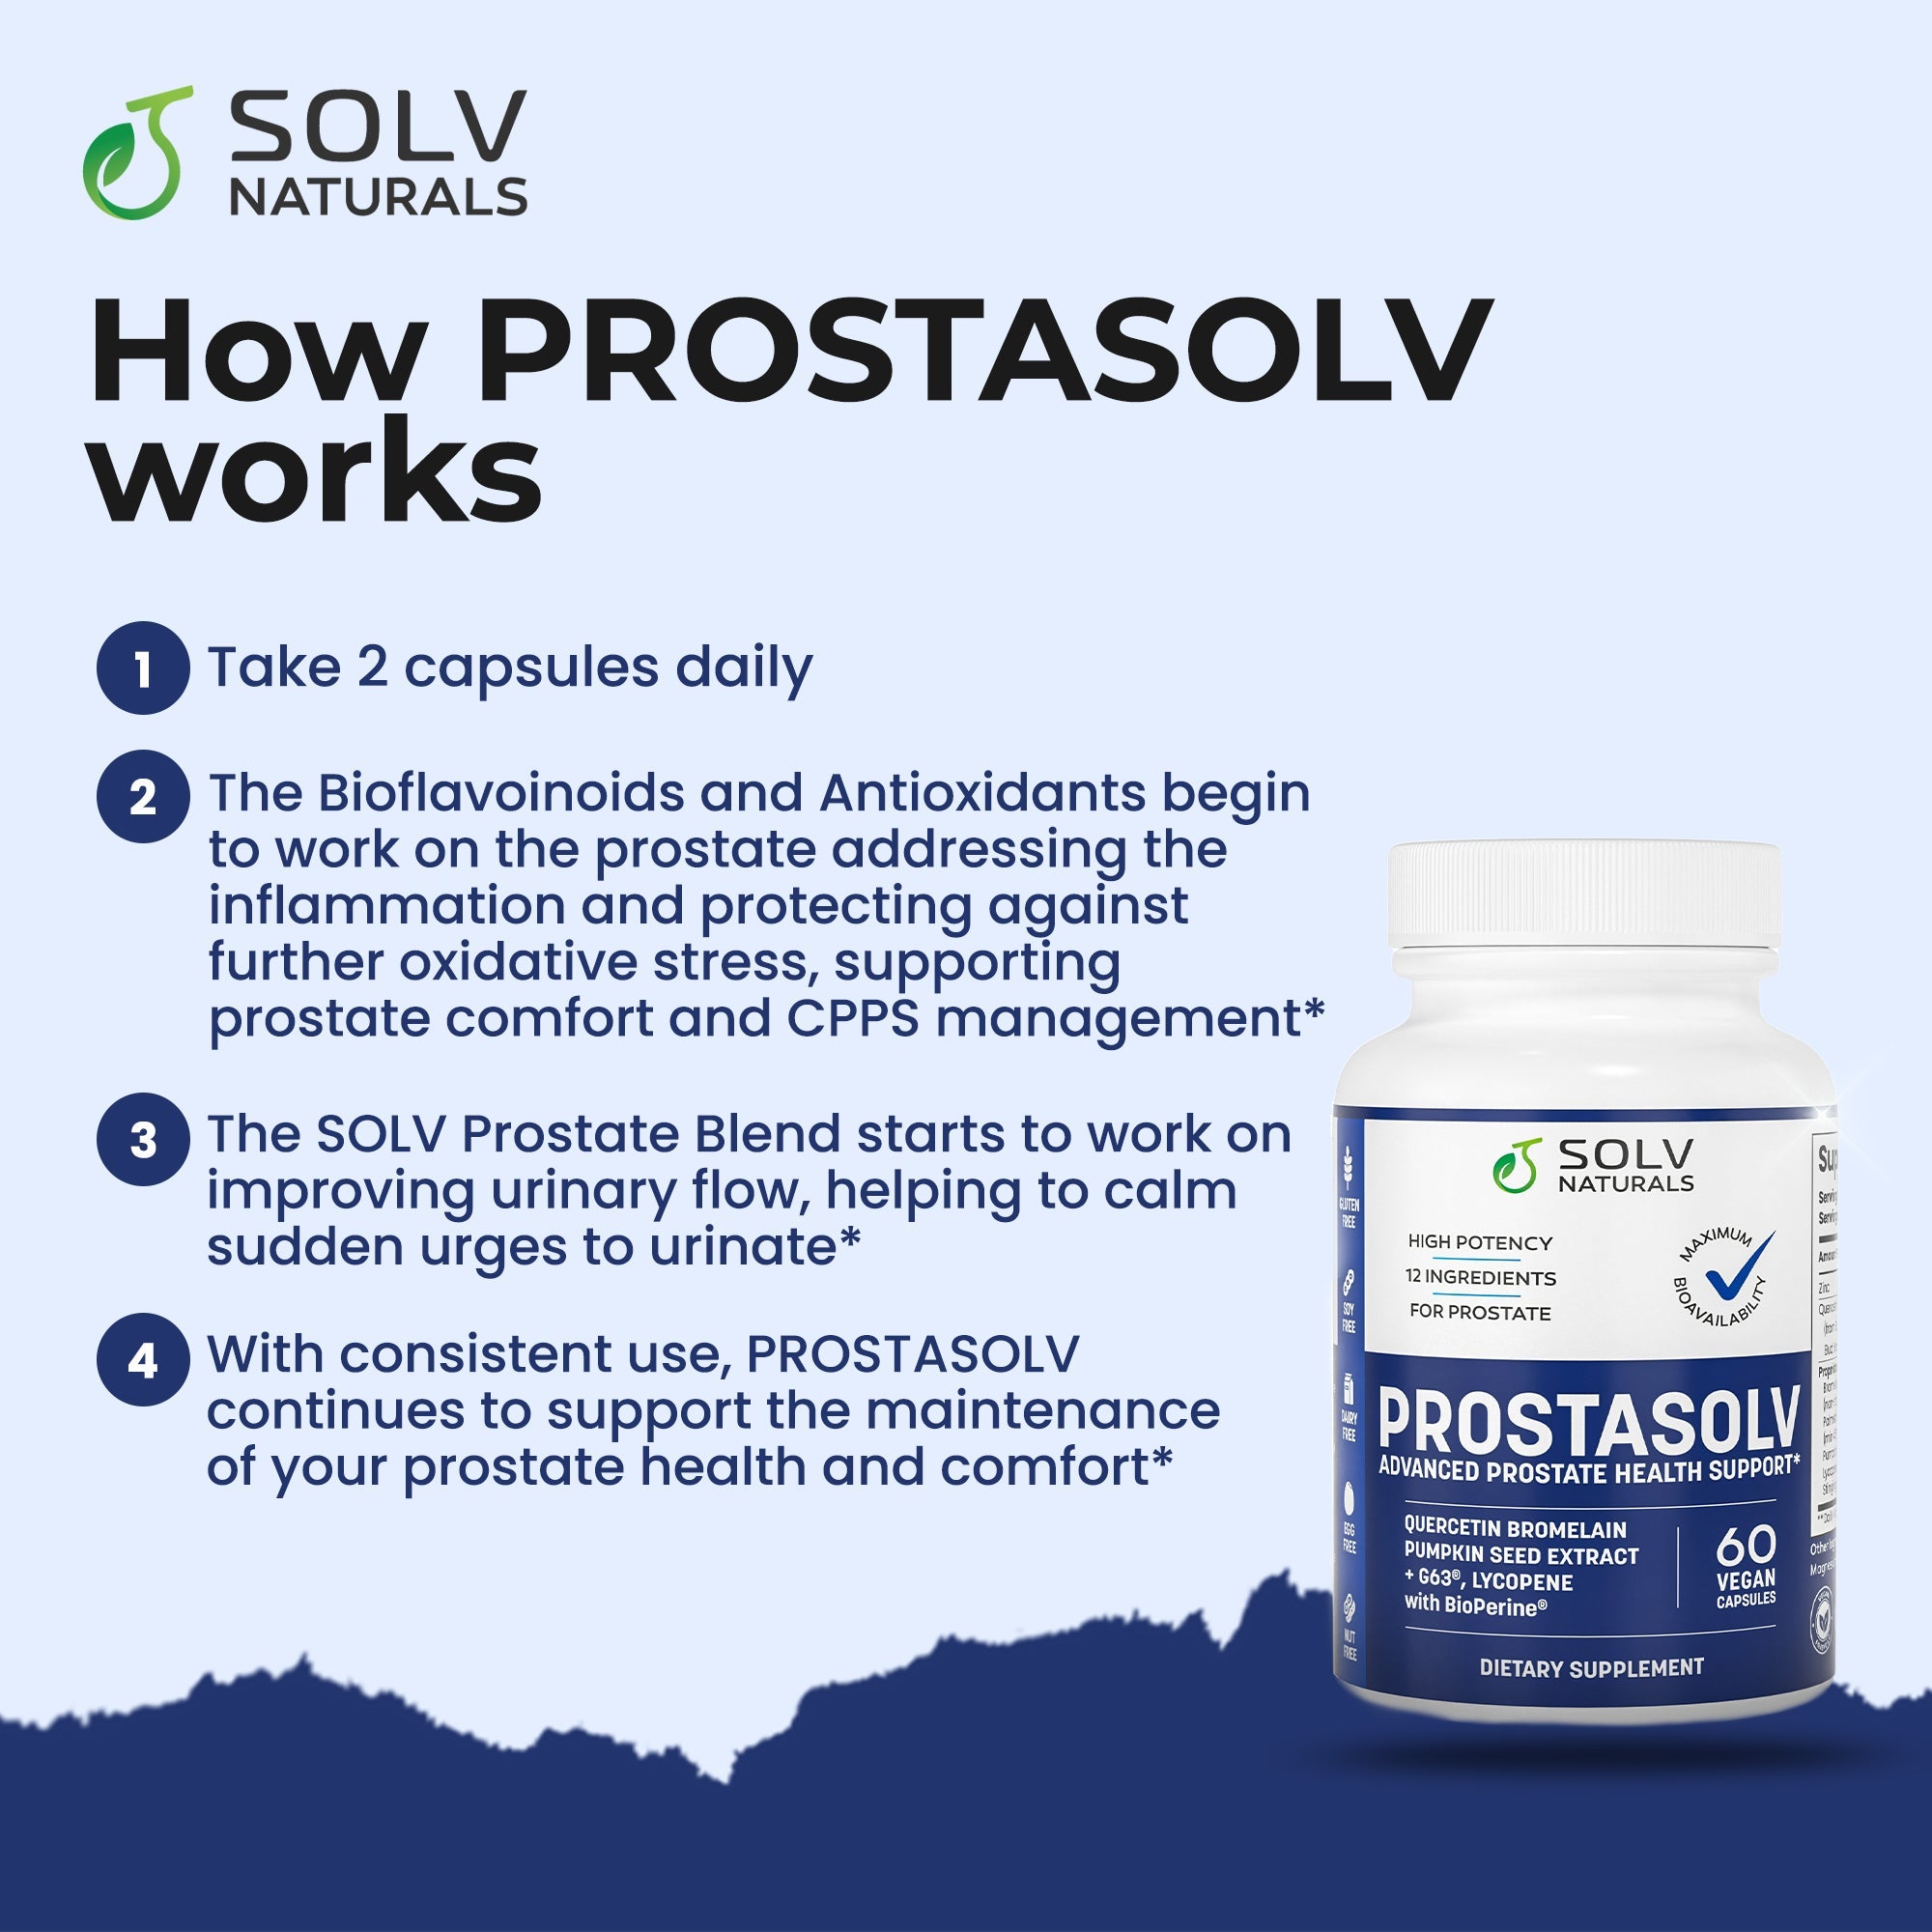 How PROSTASOLV works.  Take 2 capsules daily.  PROSTASOLV works on the prostate addressing inflammation and protecting against oxidative stress, supporting prostate comfort and cpps management, improving urinary flow and helping to calm sudden urges to urinate.  With consistent use, PROSTASOLV continues to support the maintenance of your prostate health and comfort.*